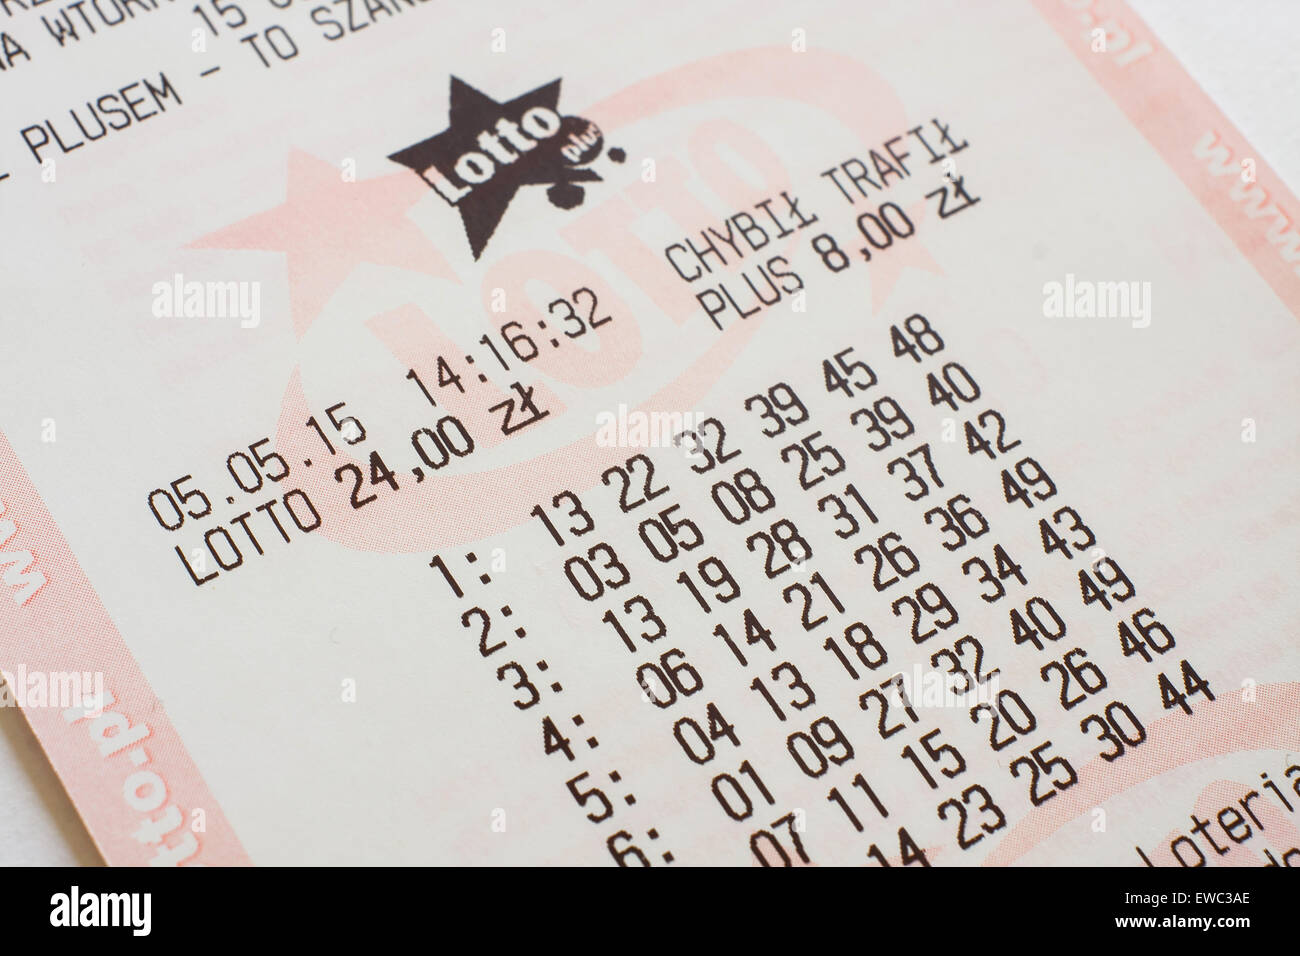 GDANSK, POLAND - MAY 05, 2015. Polish lotto ticket with numbers Stock Photo